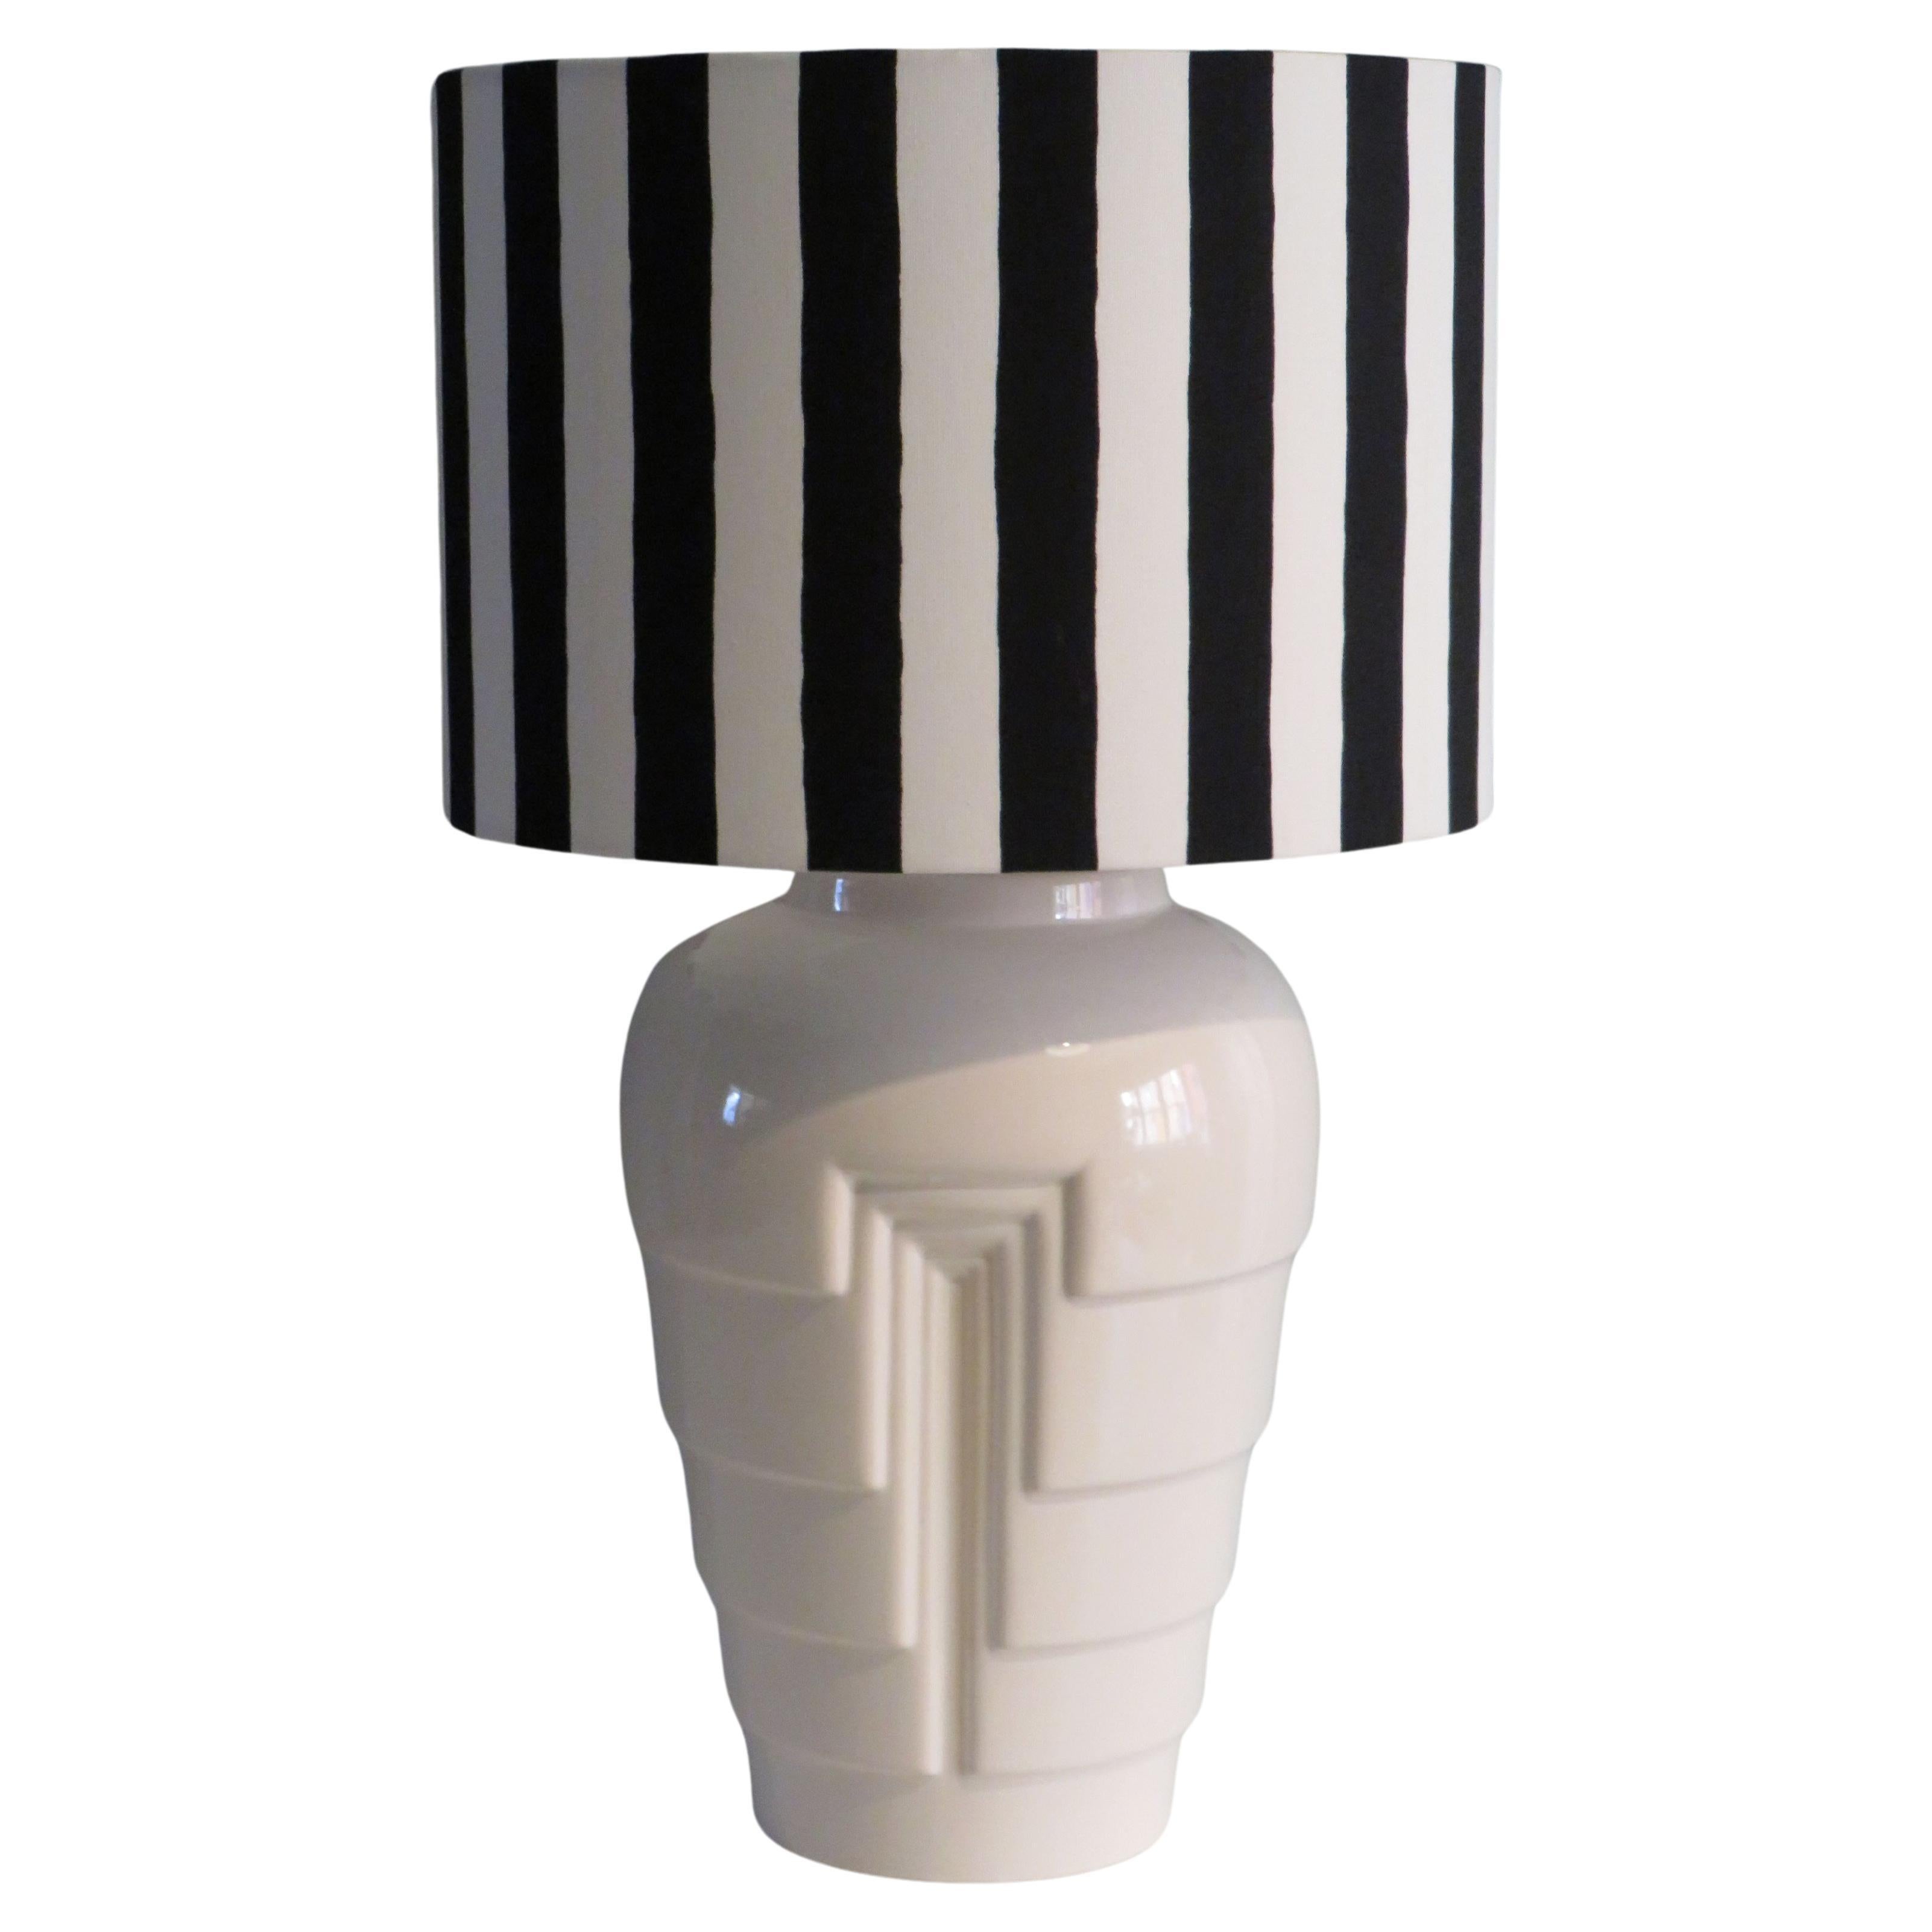 Vintage white ceramic table lamp, Memphis style with black and white lampshade